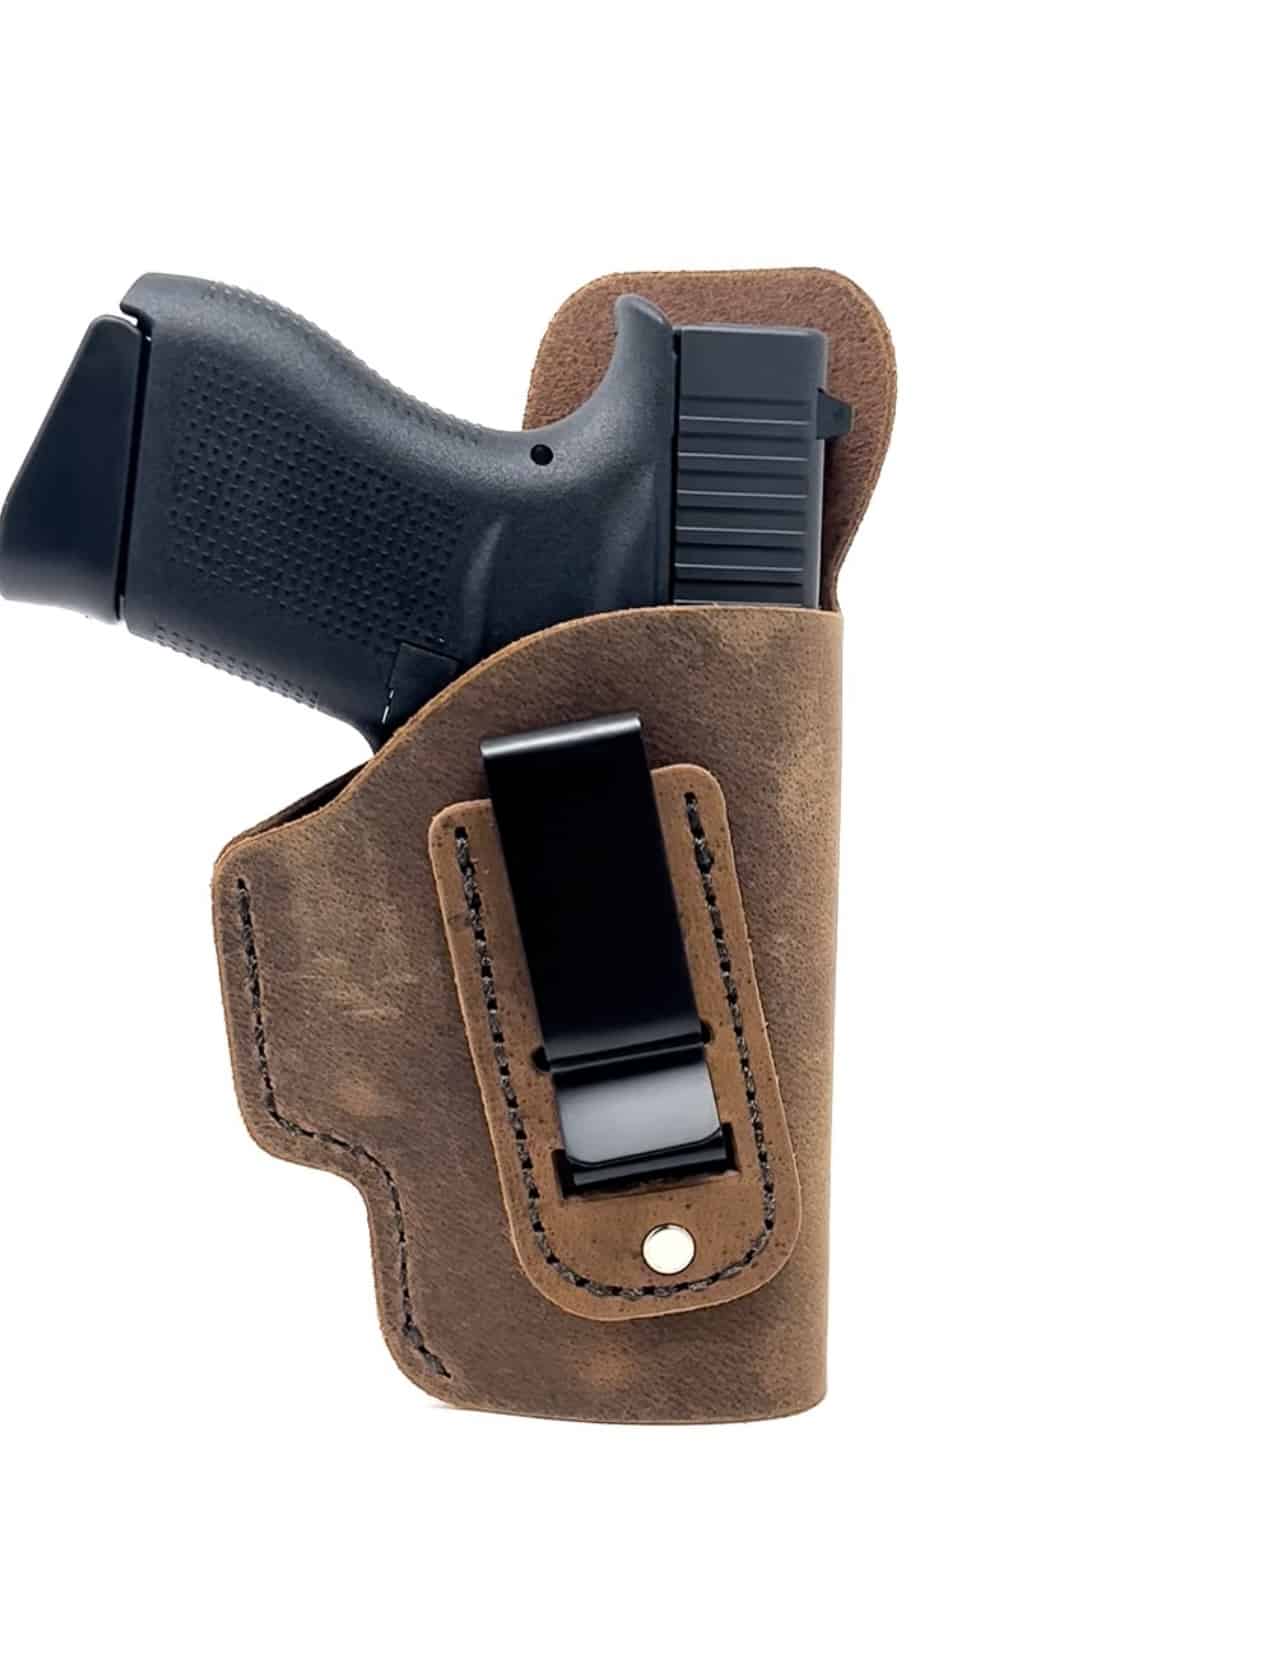 Colt Mustang 380 IWB Molded Leather Concealed Carry Holster CCW TAN LH 